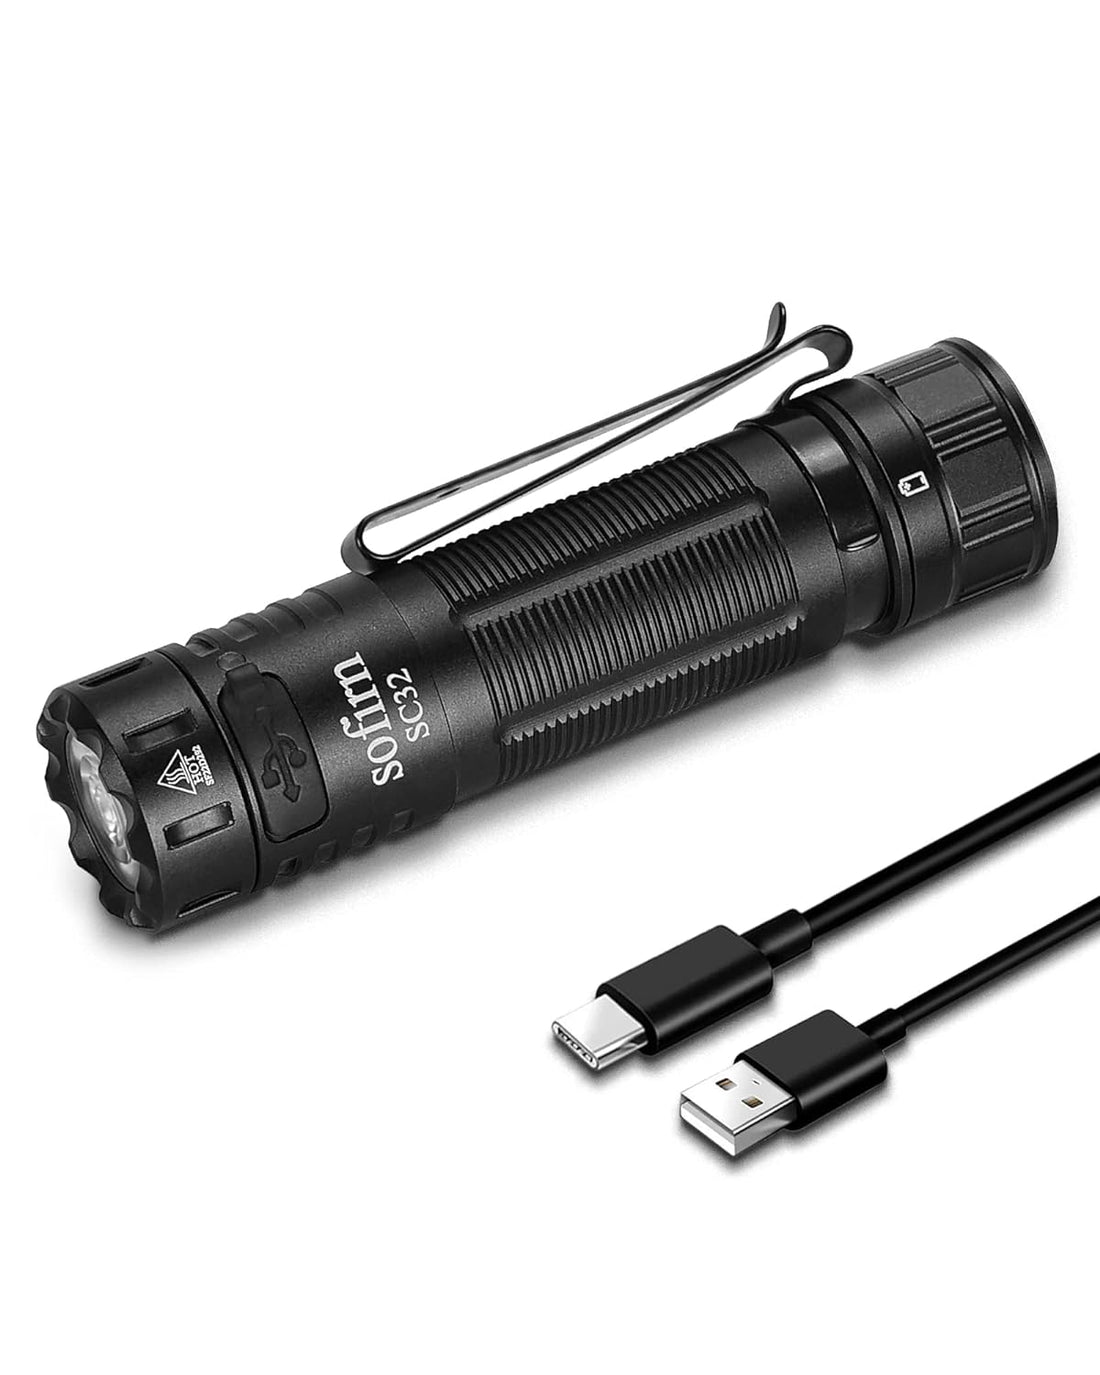 Sofirn SC32 EDC Flashlight 2000 lumens, Small Rechargeable Flashlight with Super Bright SSD40 LED 5000K, Tail E-Switch, Pocket Size Flashlight for Camping, Hiking, Dog Walking Emergency